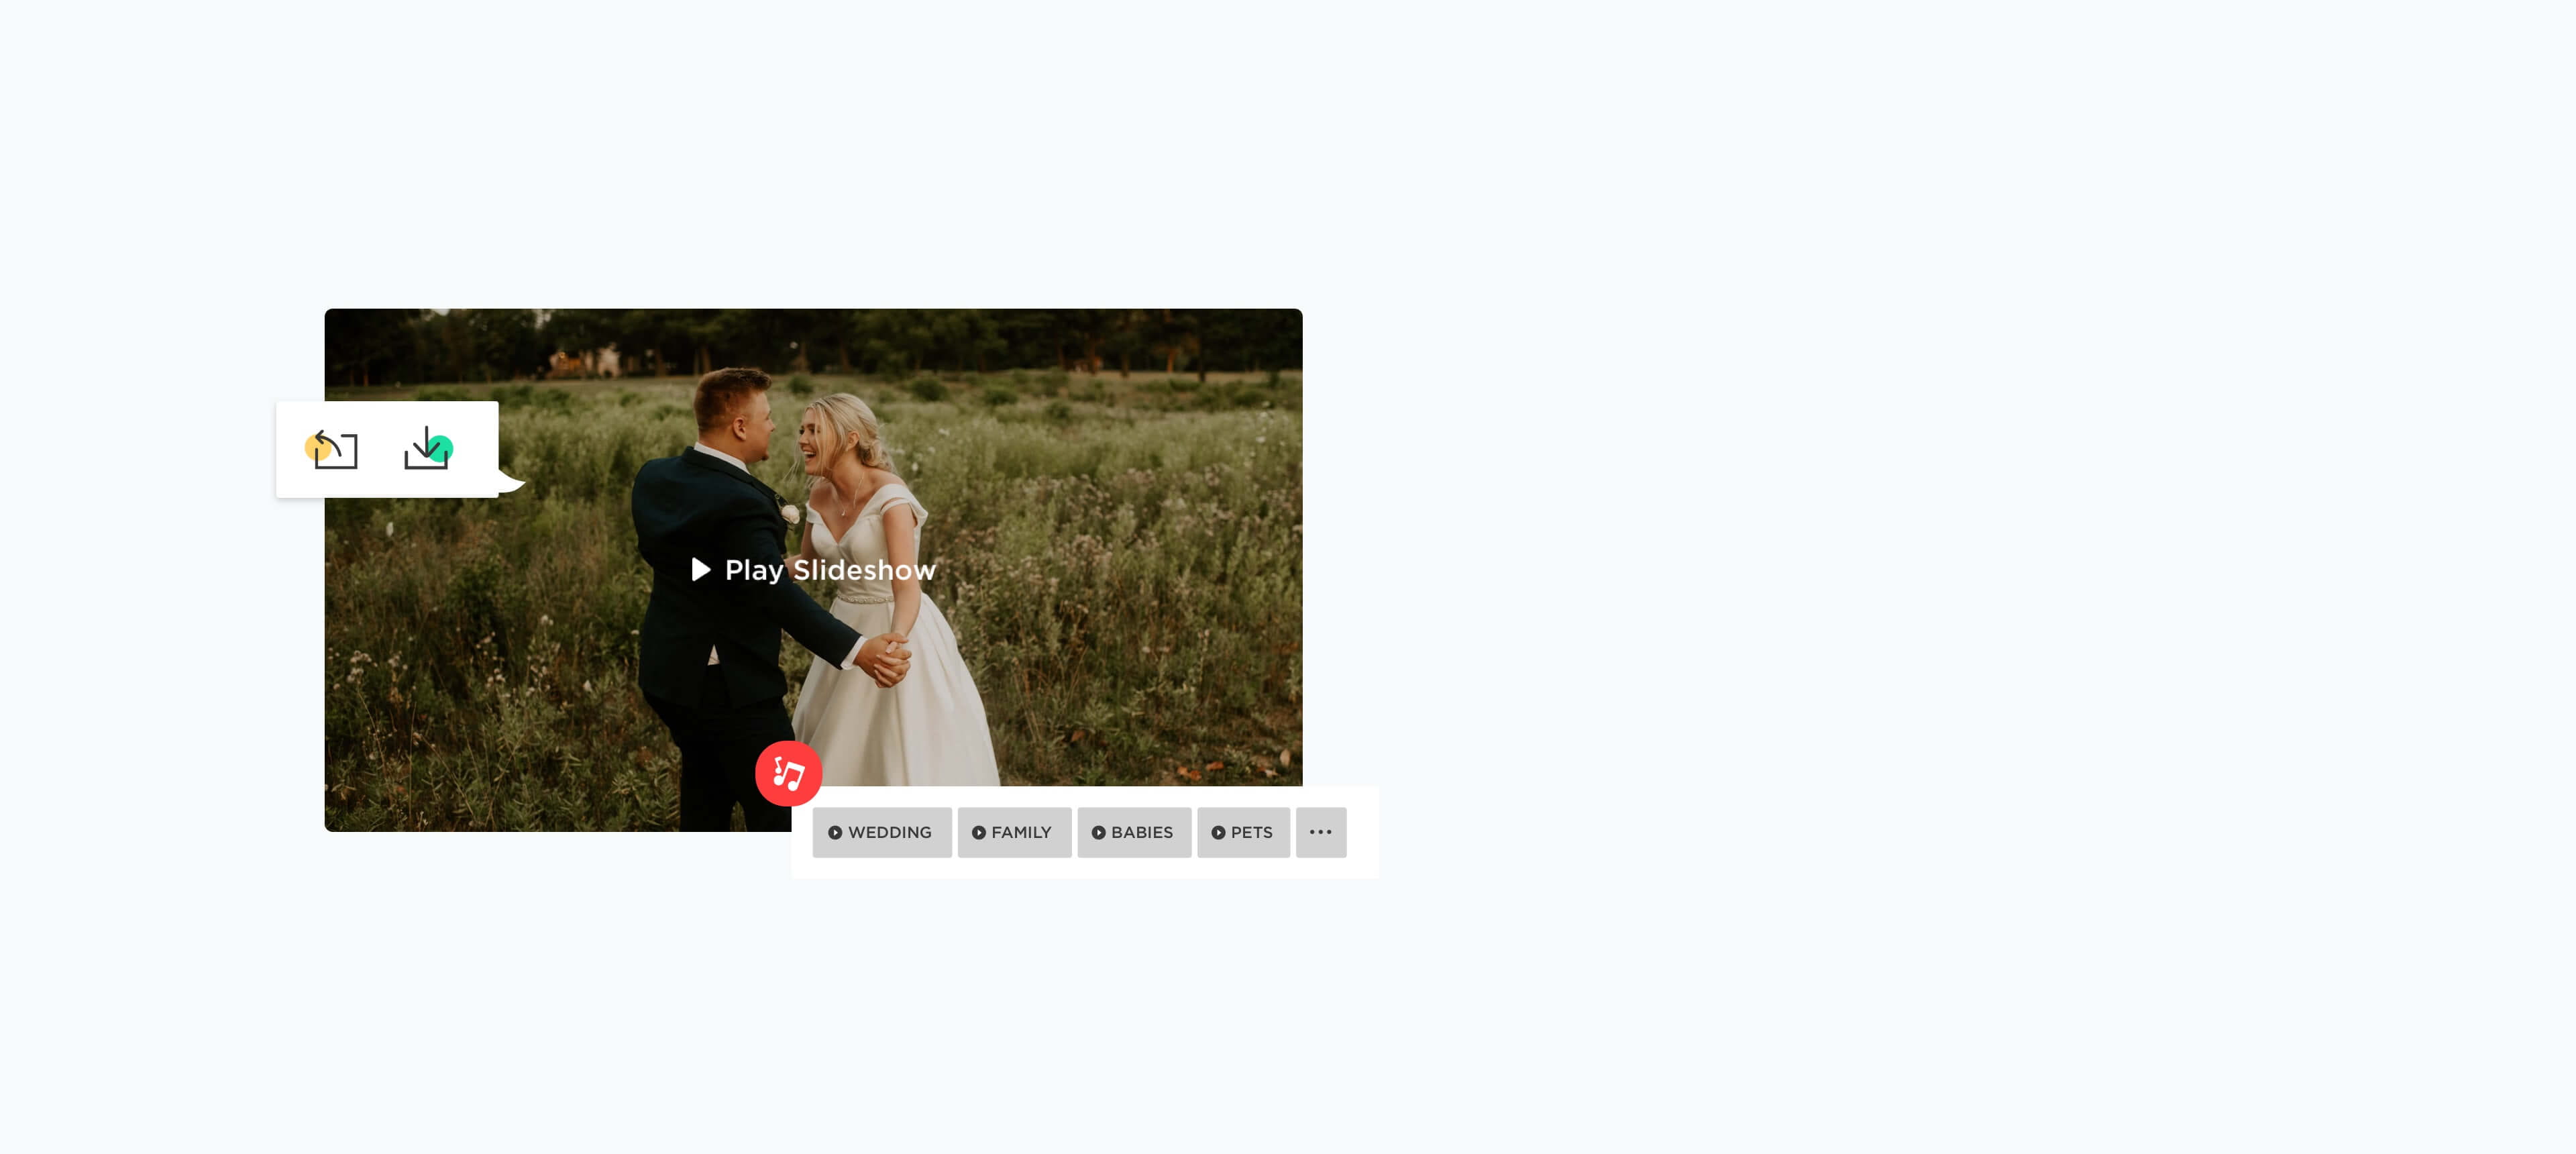 graphic showing a wedding slideshow for a couple with download and music features shown on interface